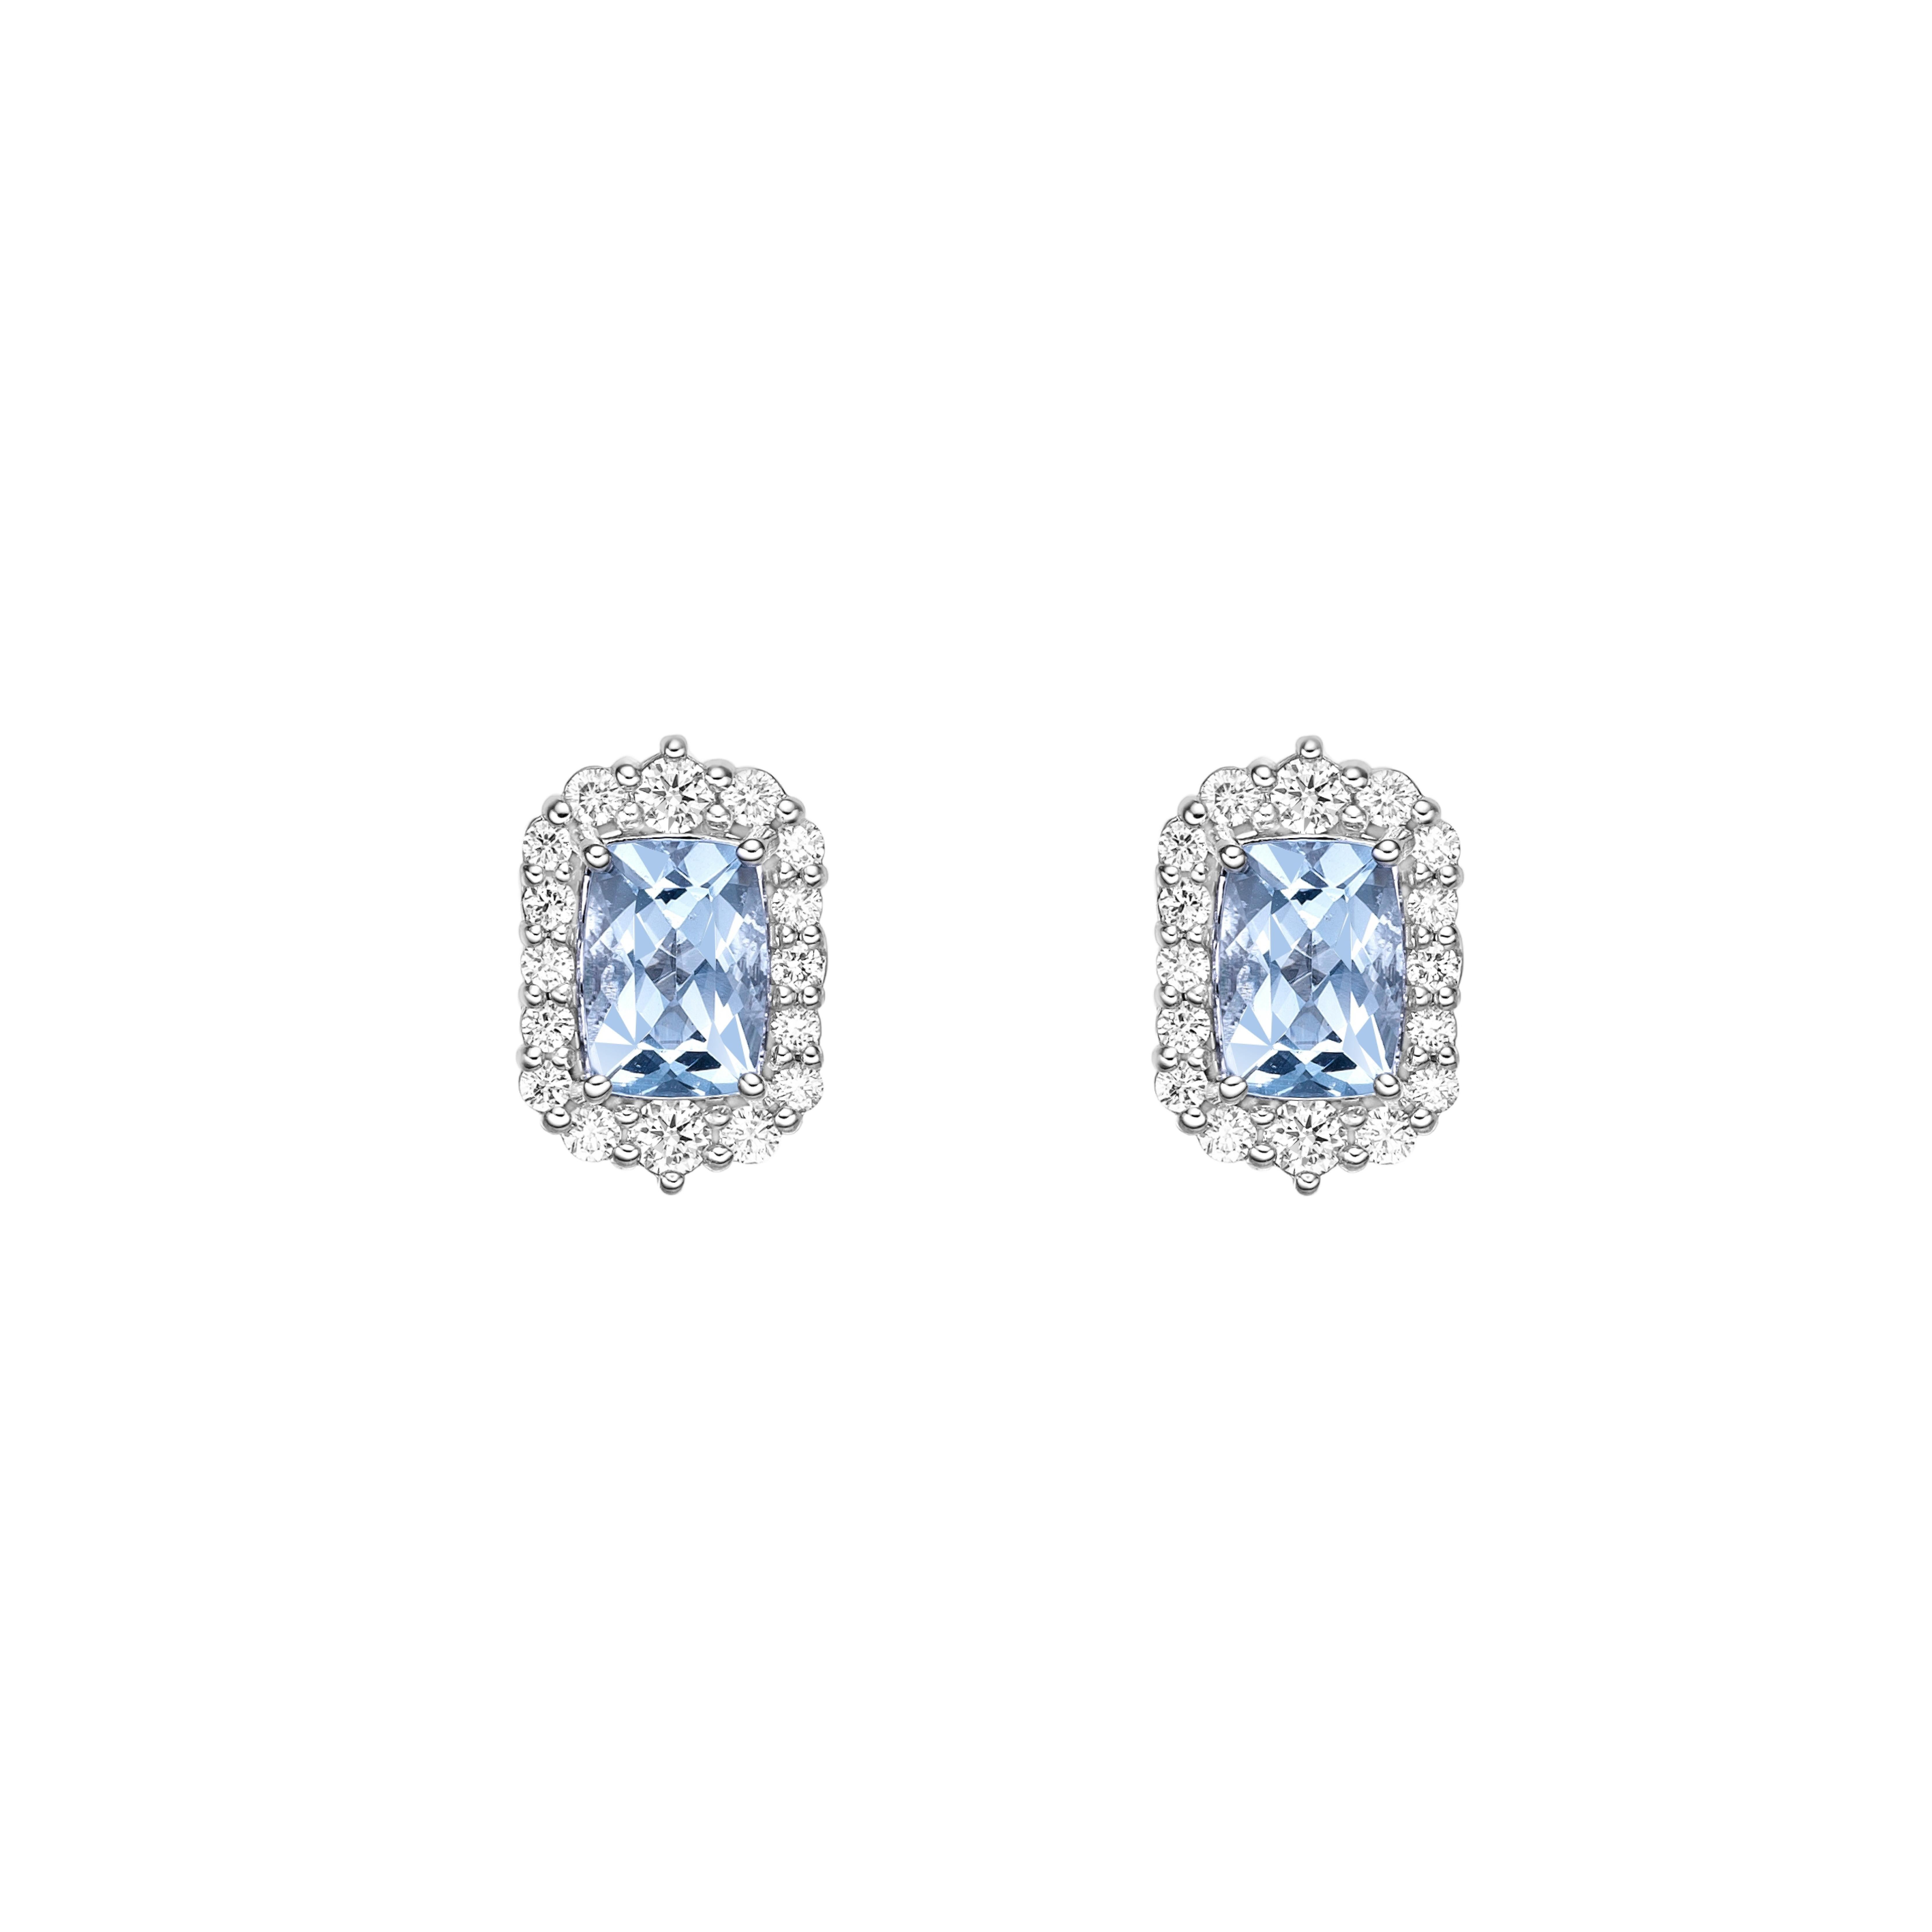 Contemporary 1.616 Carat Aquamarine Stud Earrings in 18Karat White gold with White Diamond. For Sale